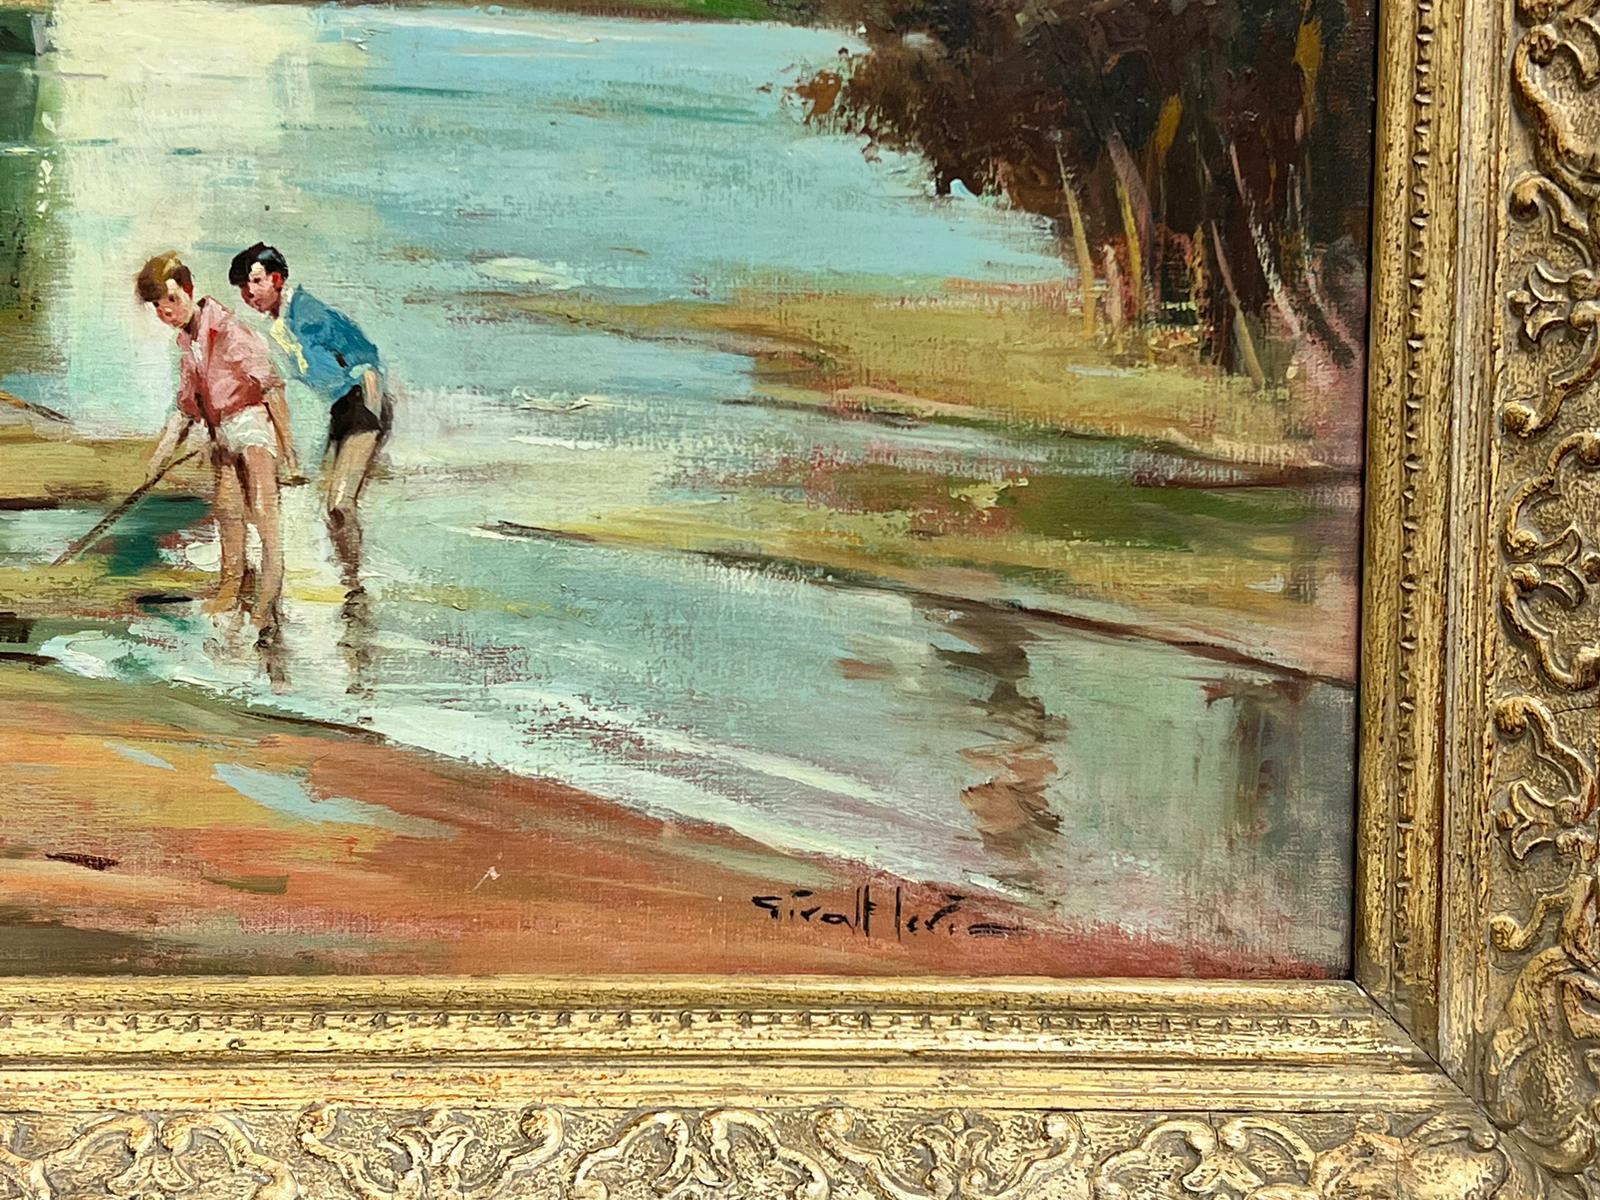 Mother and children playing by the edge of a river
J. Giralt Lerin (b.1907) Spanish
signed oil on canvas ,framed
canvas: 24 x 36 inches
framed: 29.5 x 41.5 inches
the painting is in overall very good and sound condition, please note we do not